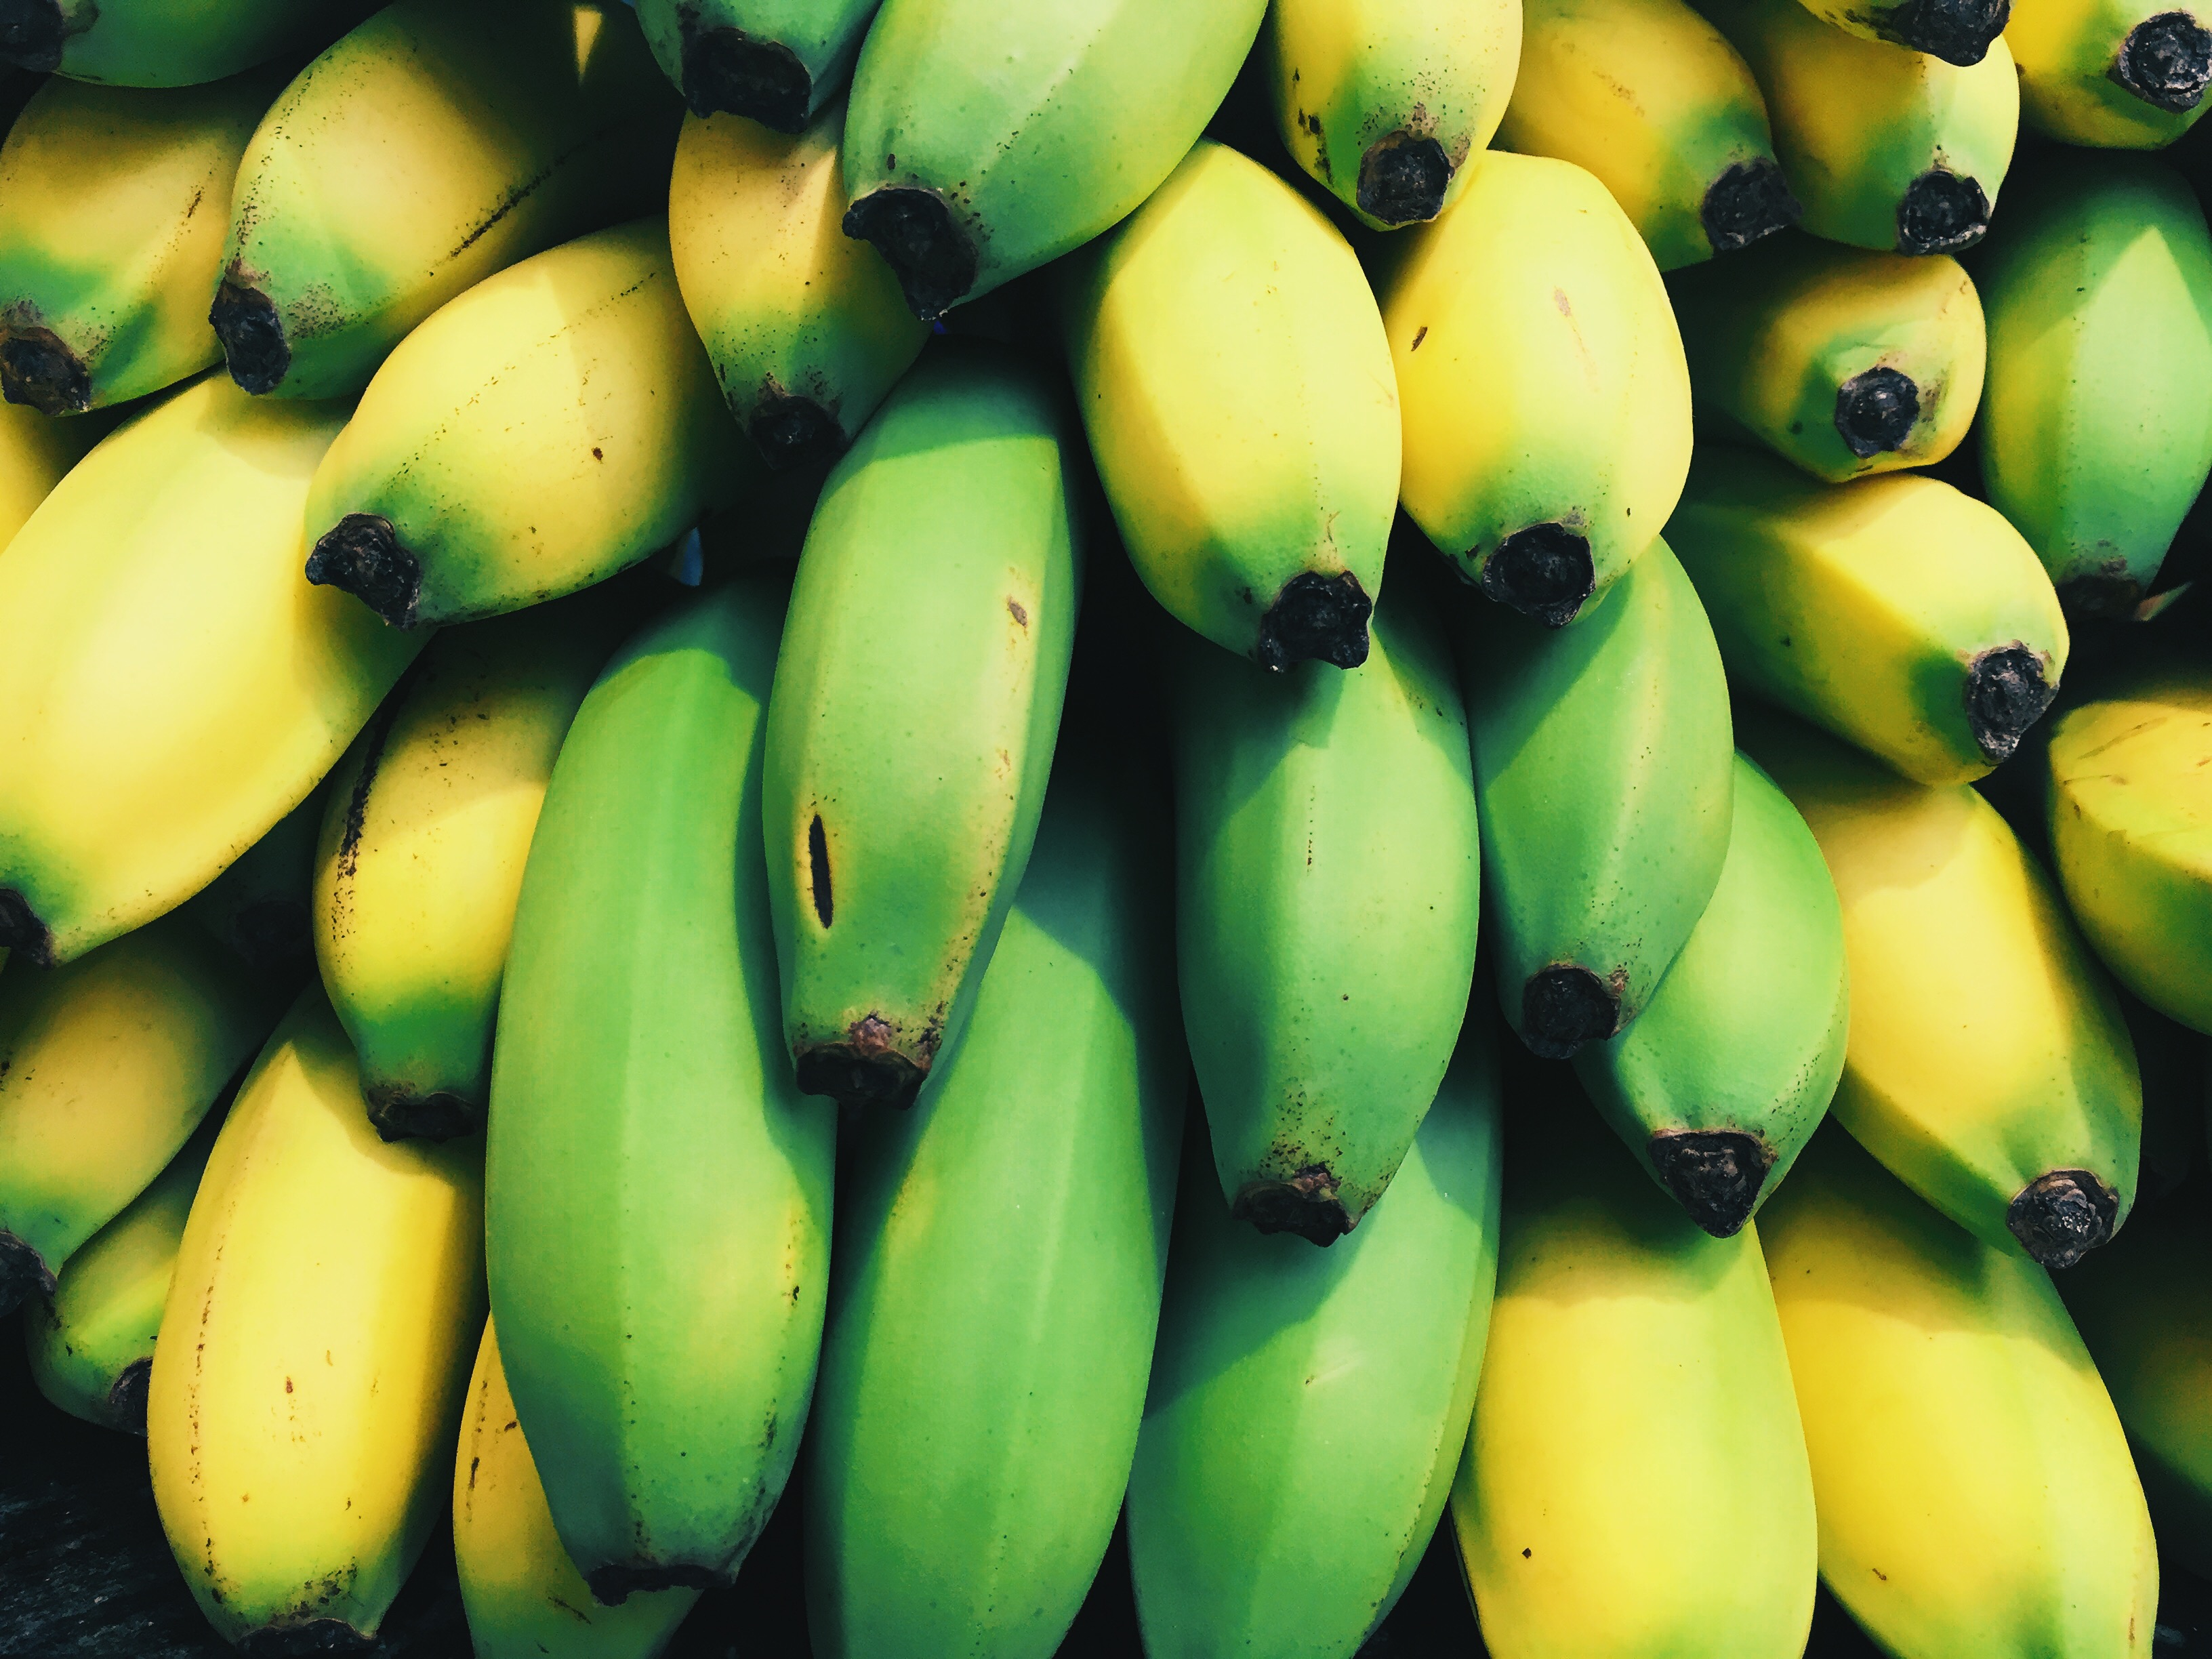 158032 Screensavers and Wallpapers Bananas for phone. Download fruits, food, bananas, fruit pictures for free